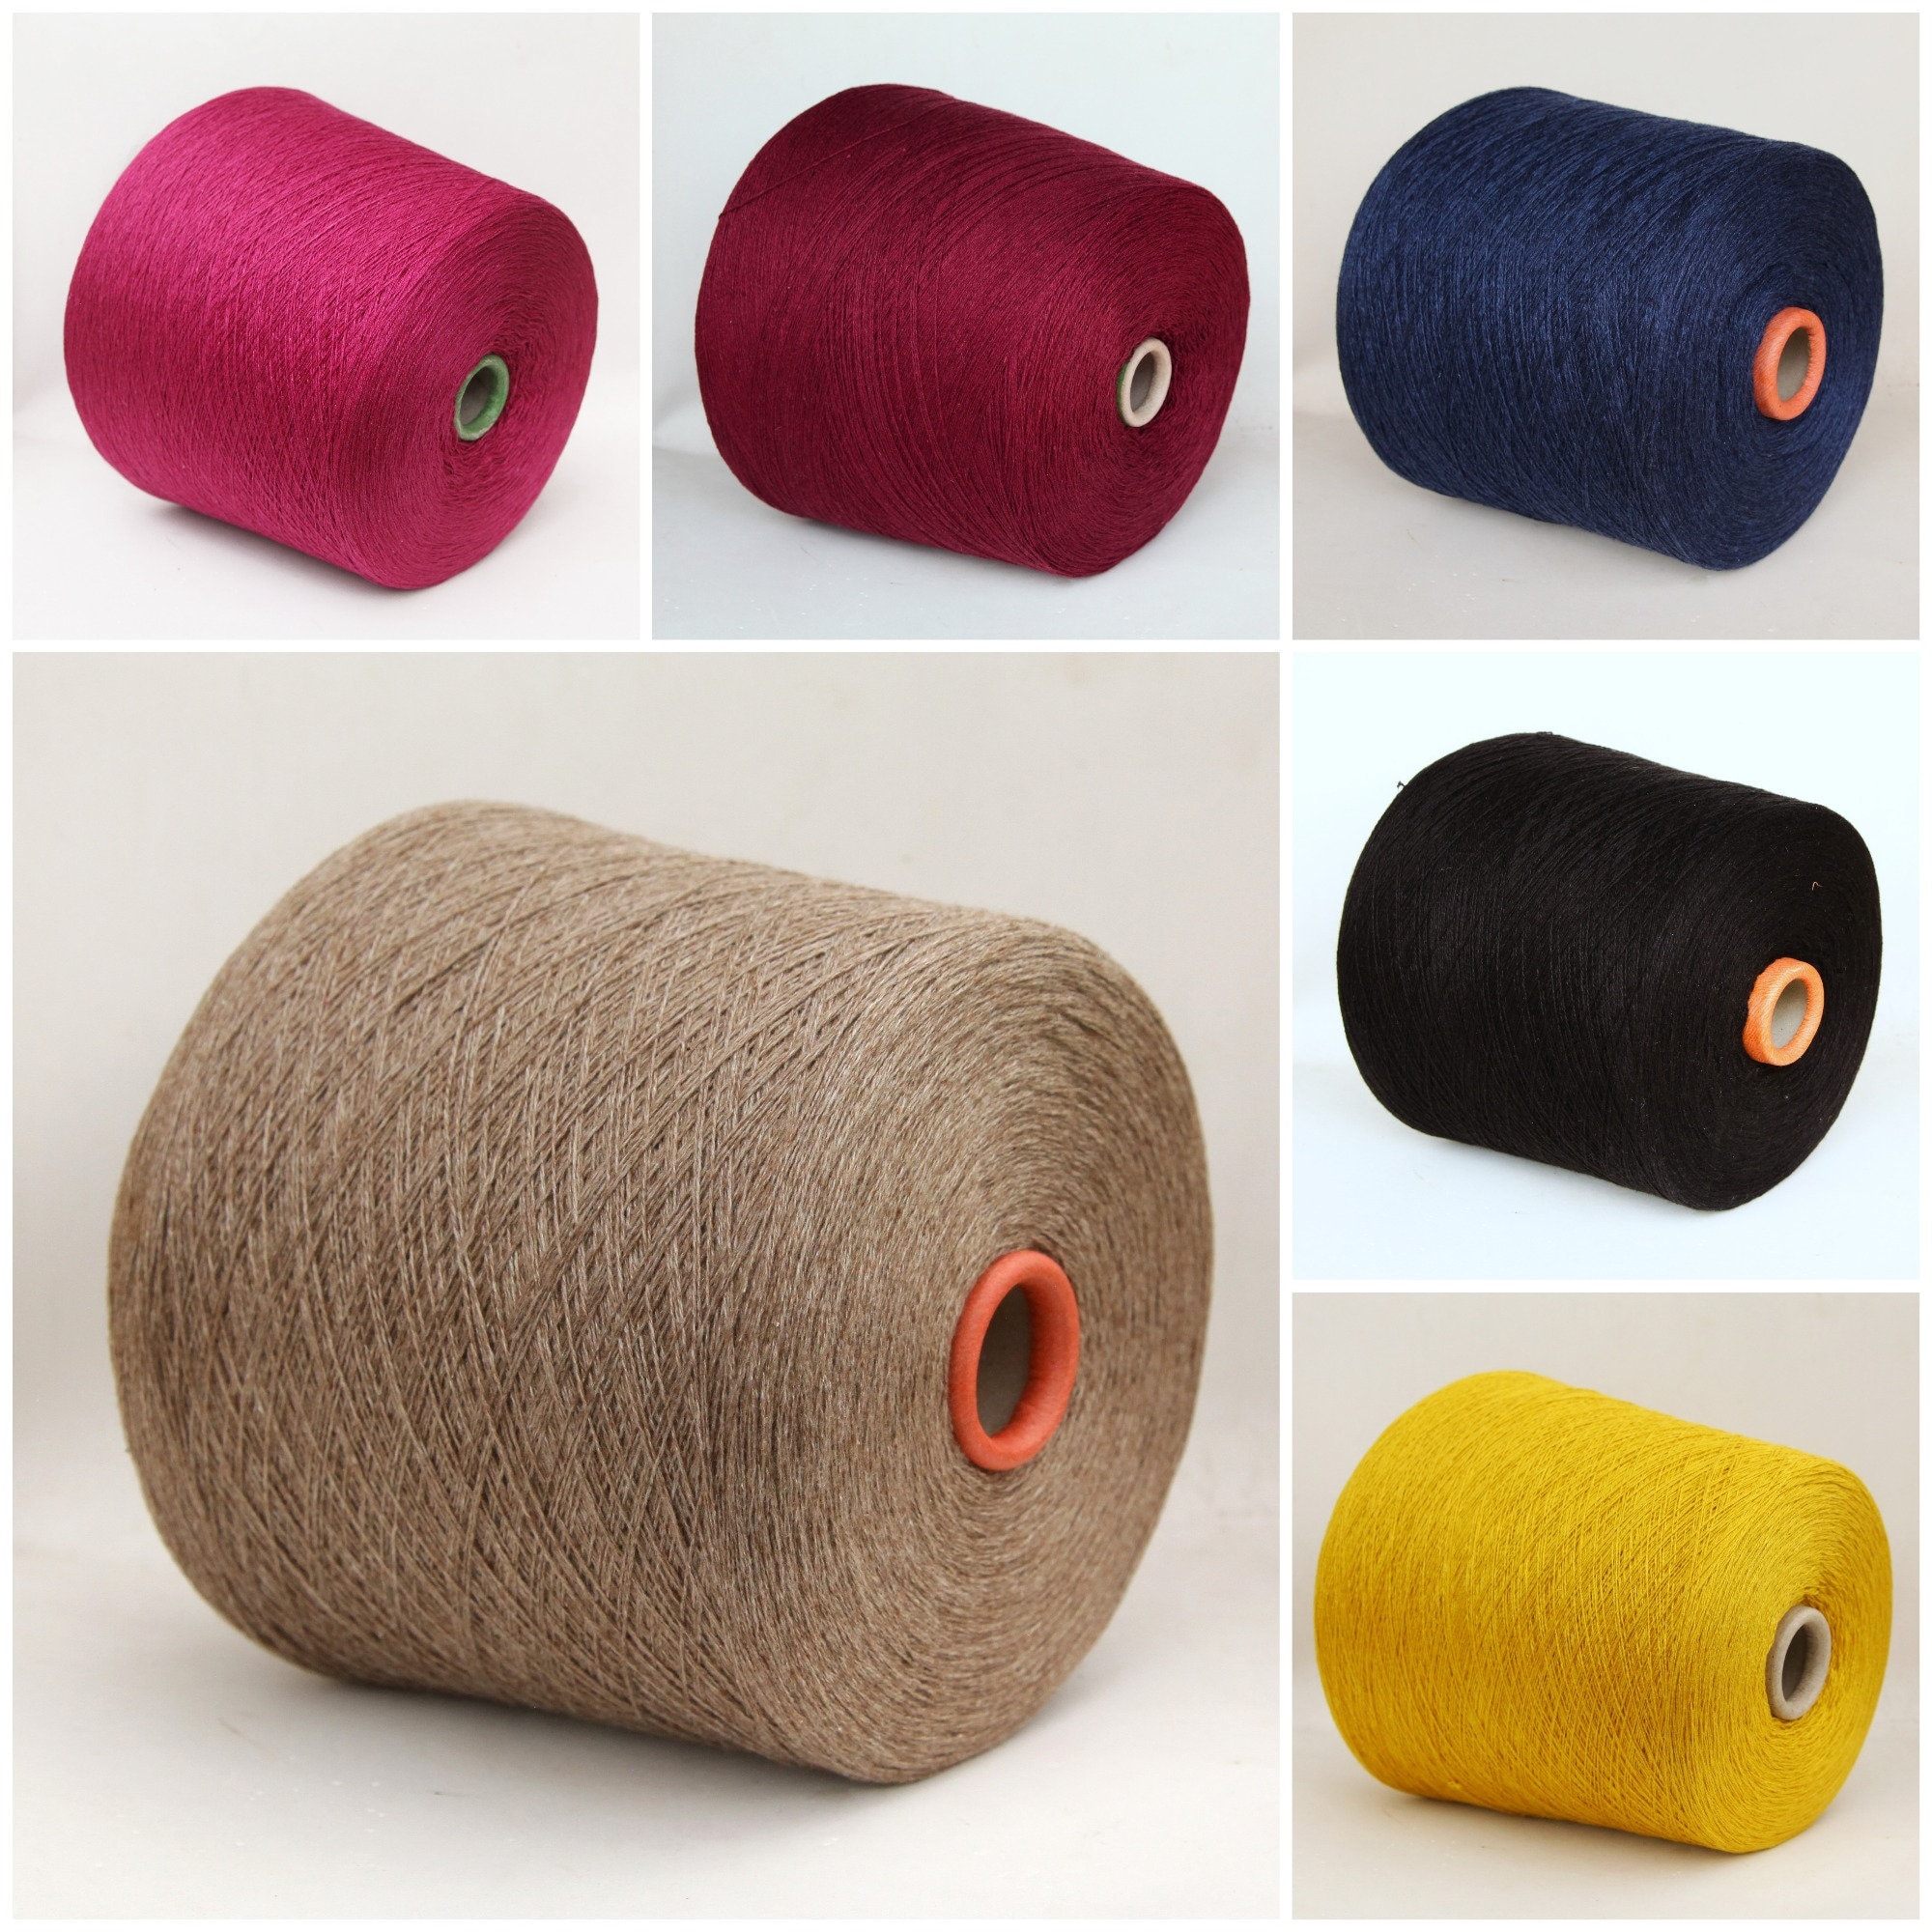 Cashmere / silk yarn on cone, lace weight yarn for knitting, weaving and  crochet, per 100g